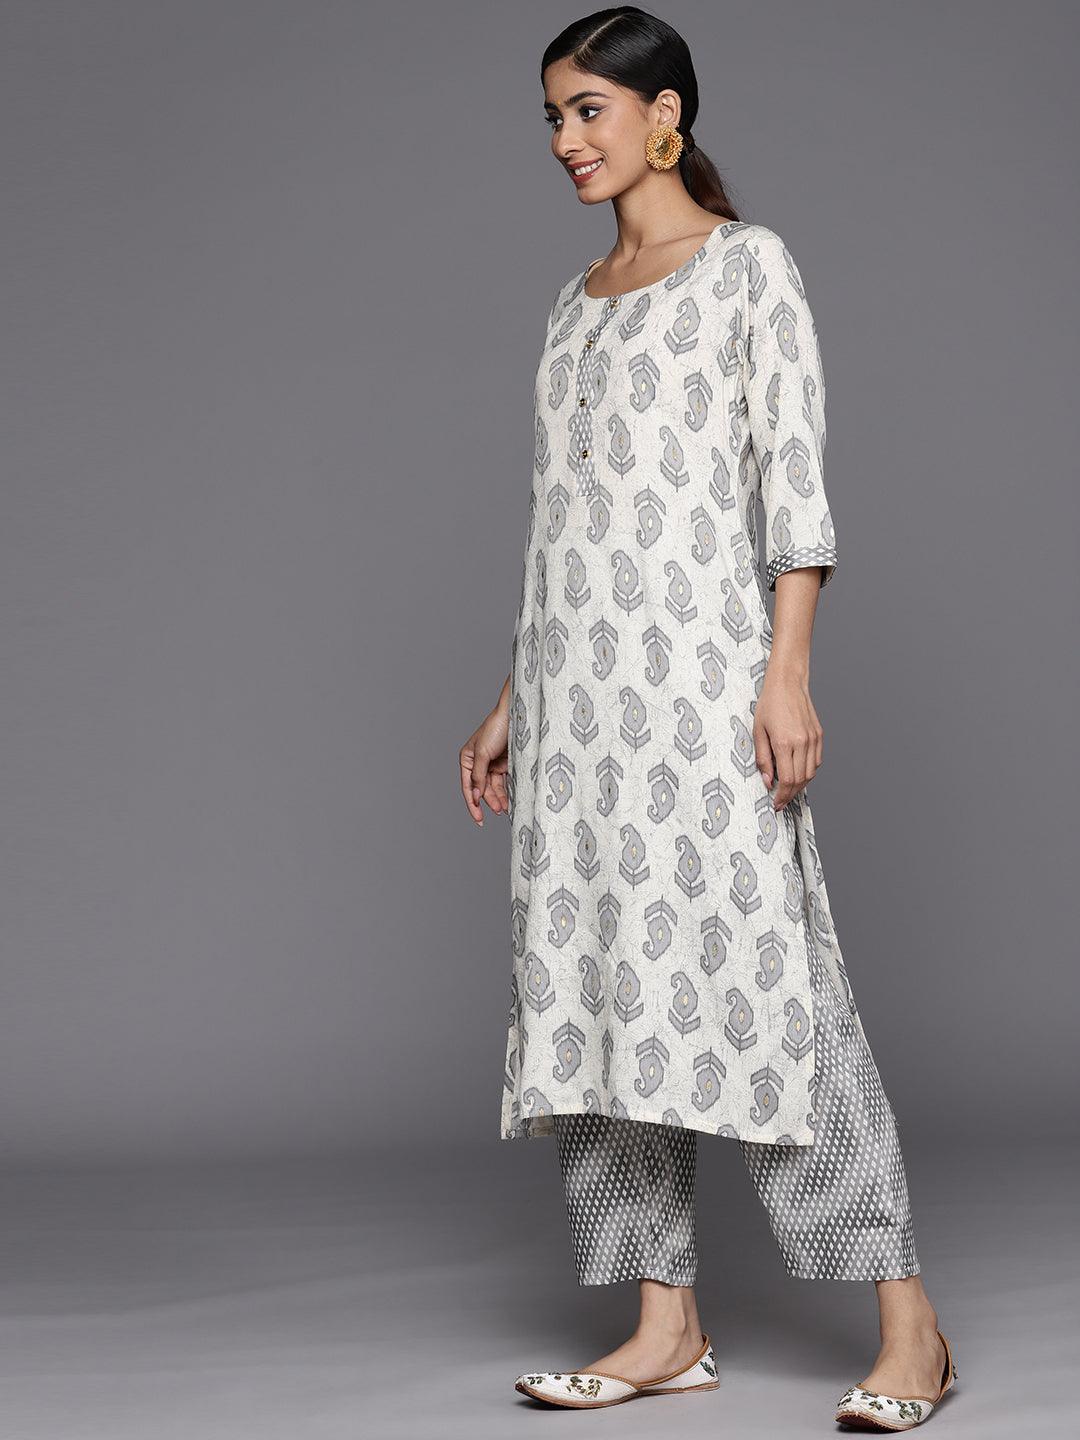 Off White Printed Rayon Straight Suit Set With Trousers - Libas